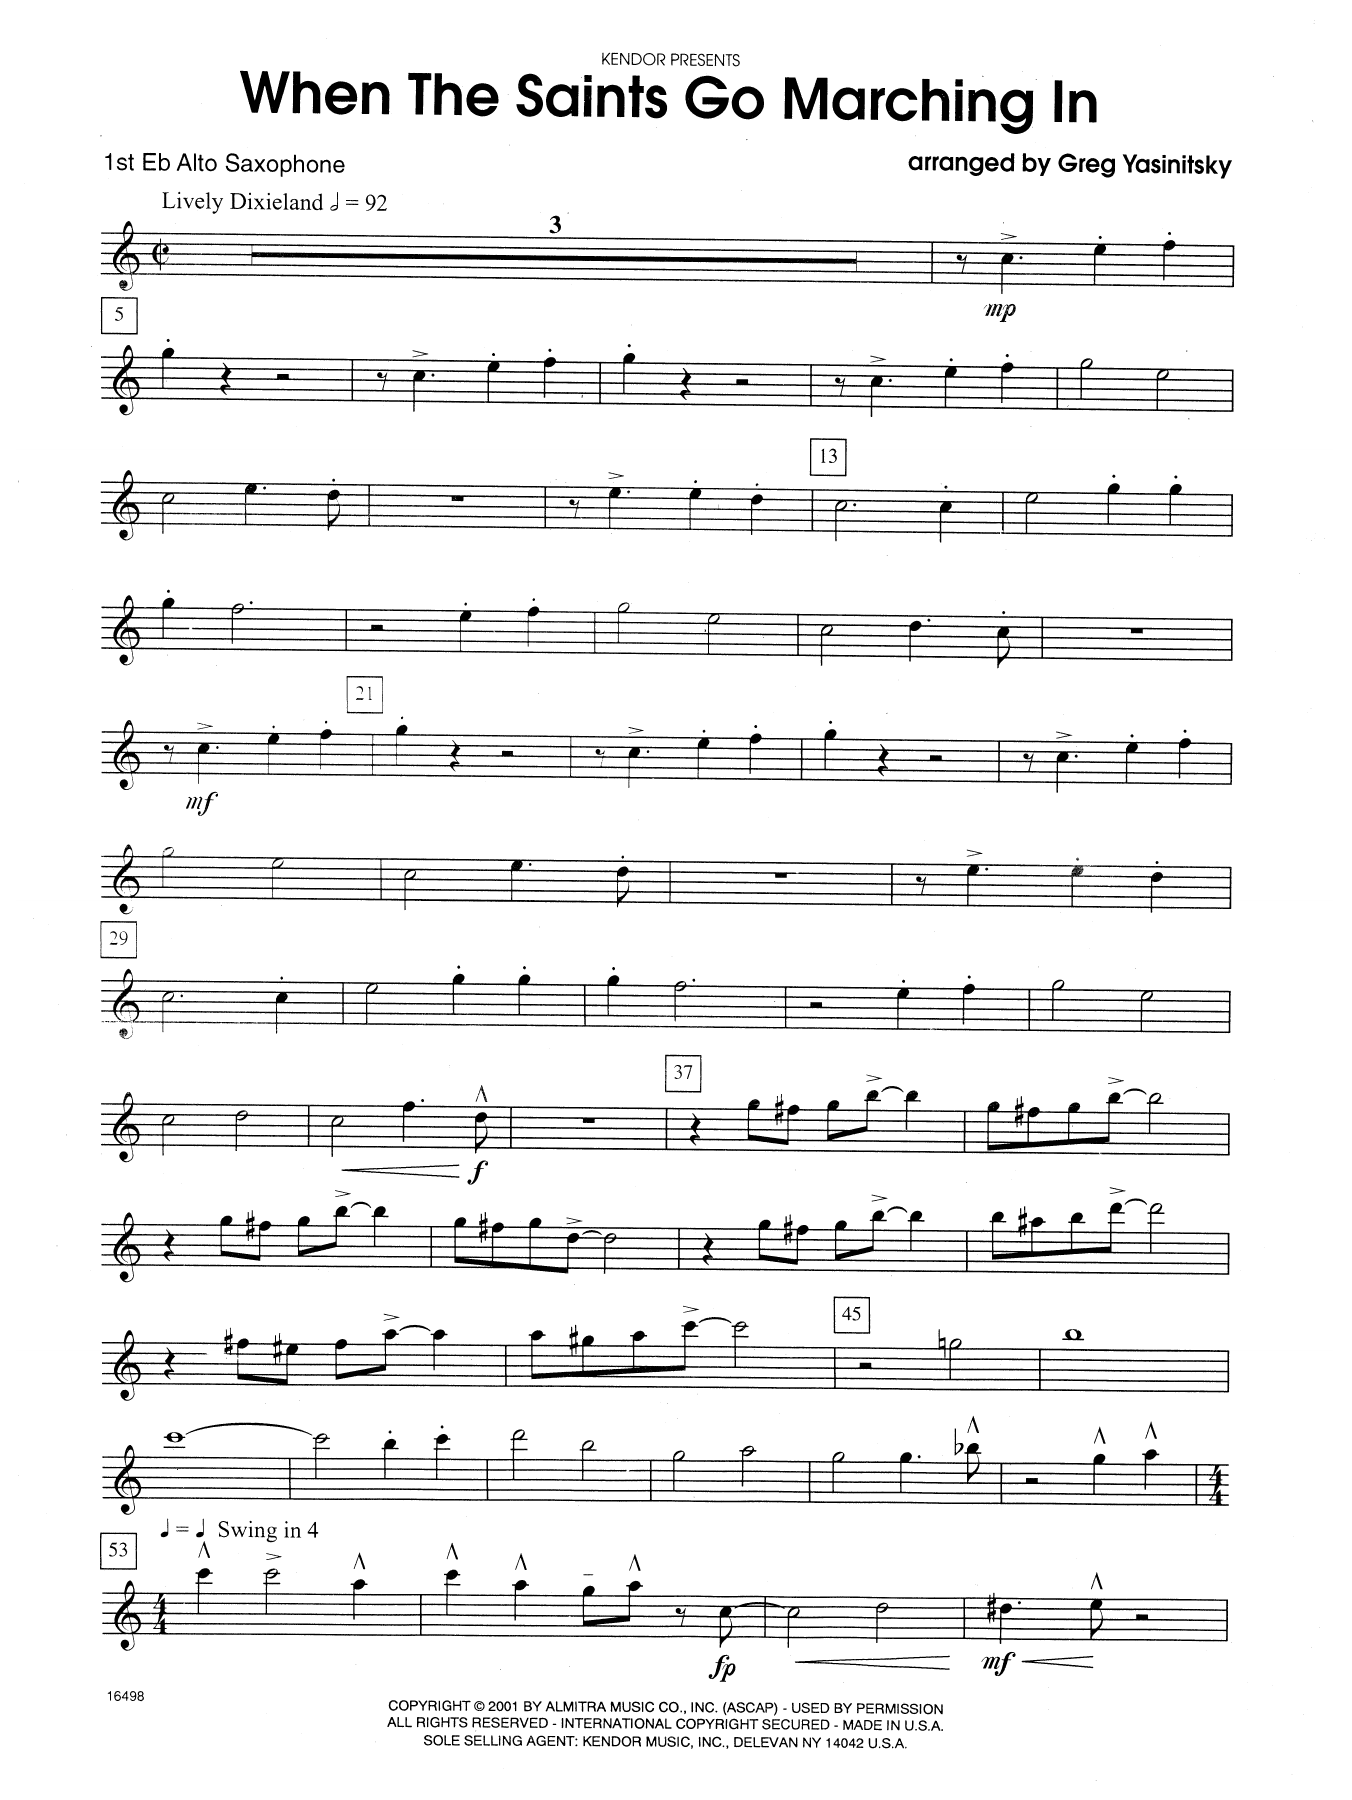 Download Gregory Yasinitsky When the Saints Go Marching In - 1st Eb Sheet Music